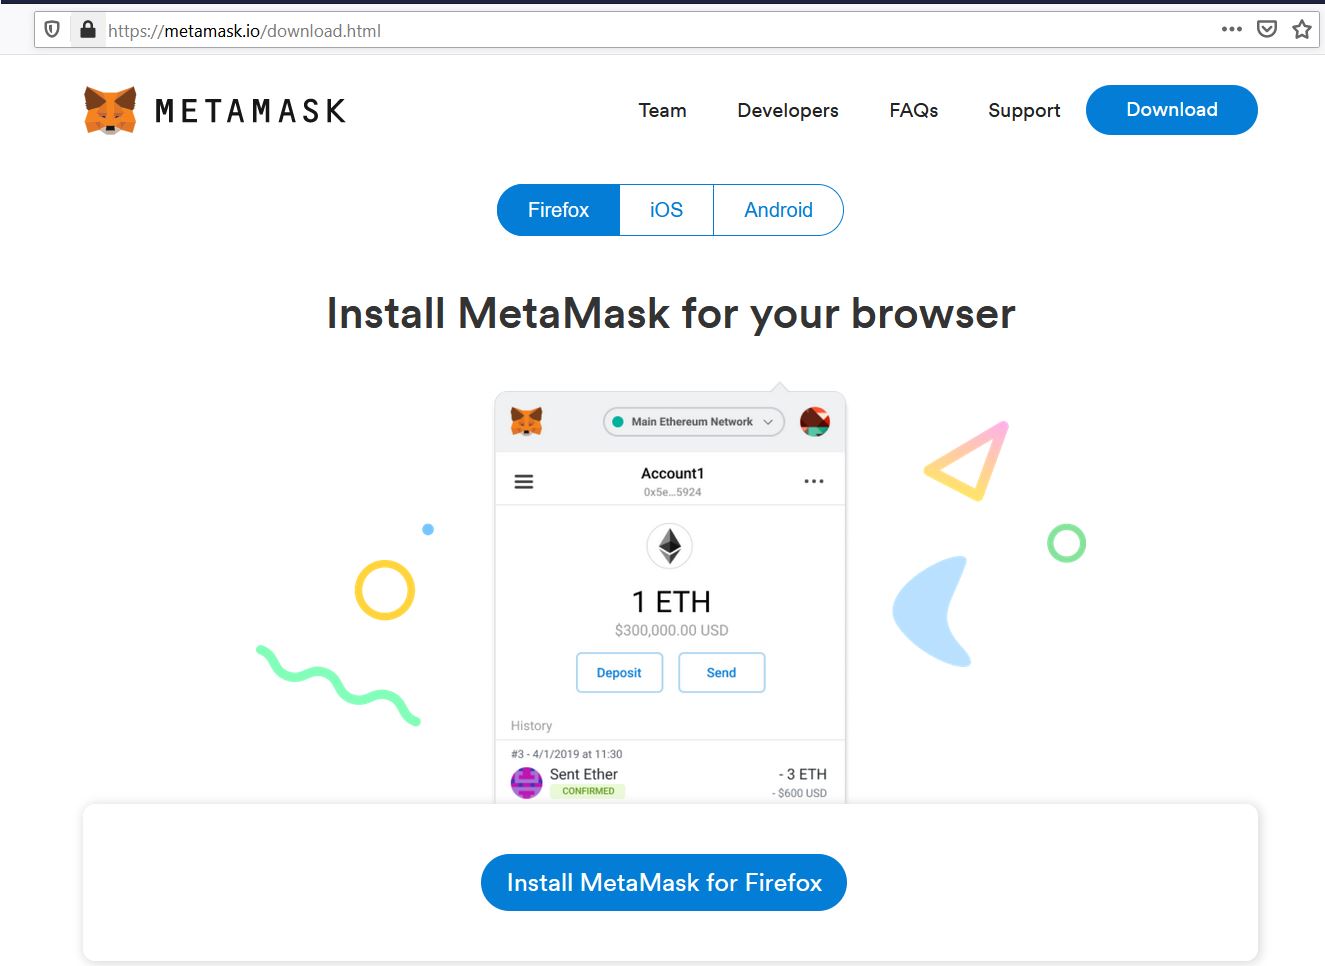 why does metamask only serve united states